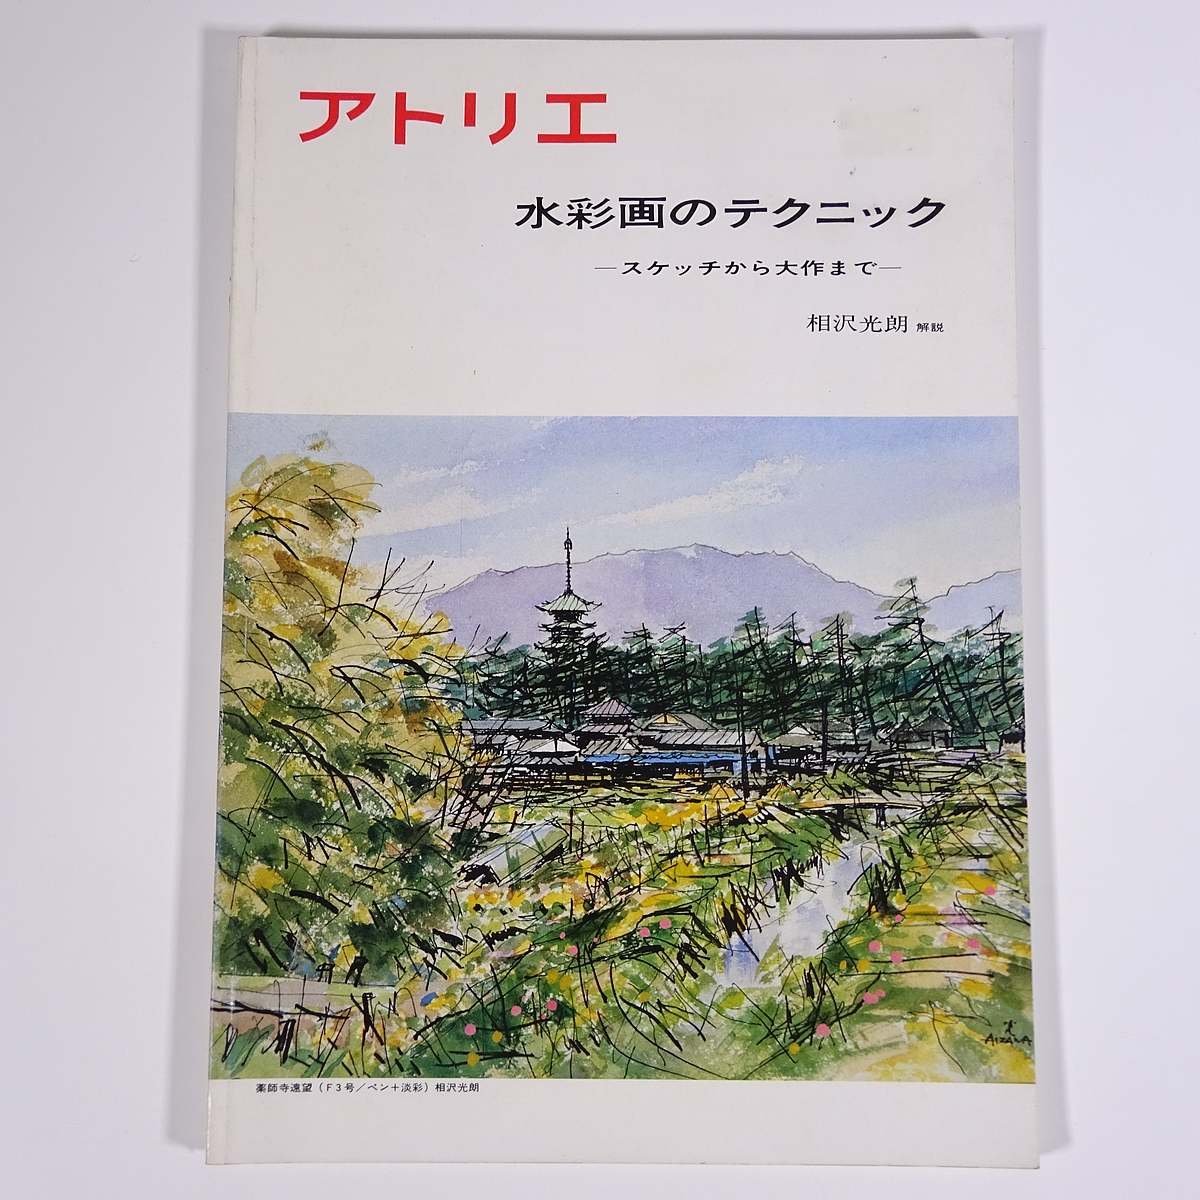 Atelier No.577 1975/3 Atelier Publishing Magazine Art Fine Art Painting Special Feature: Watercolor Techniques From Sketches to Masterpieces Commentary by Mitsuo Aizawa and others, magazine, art, Entertainment, Painting